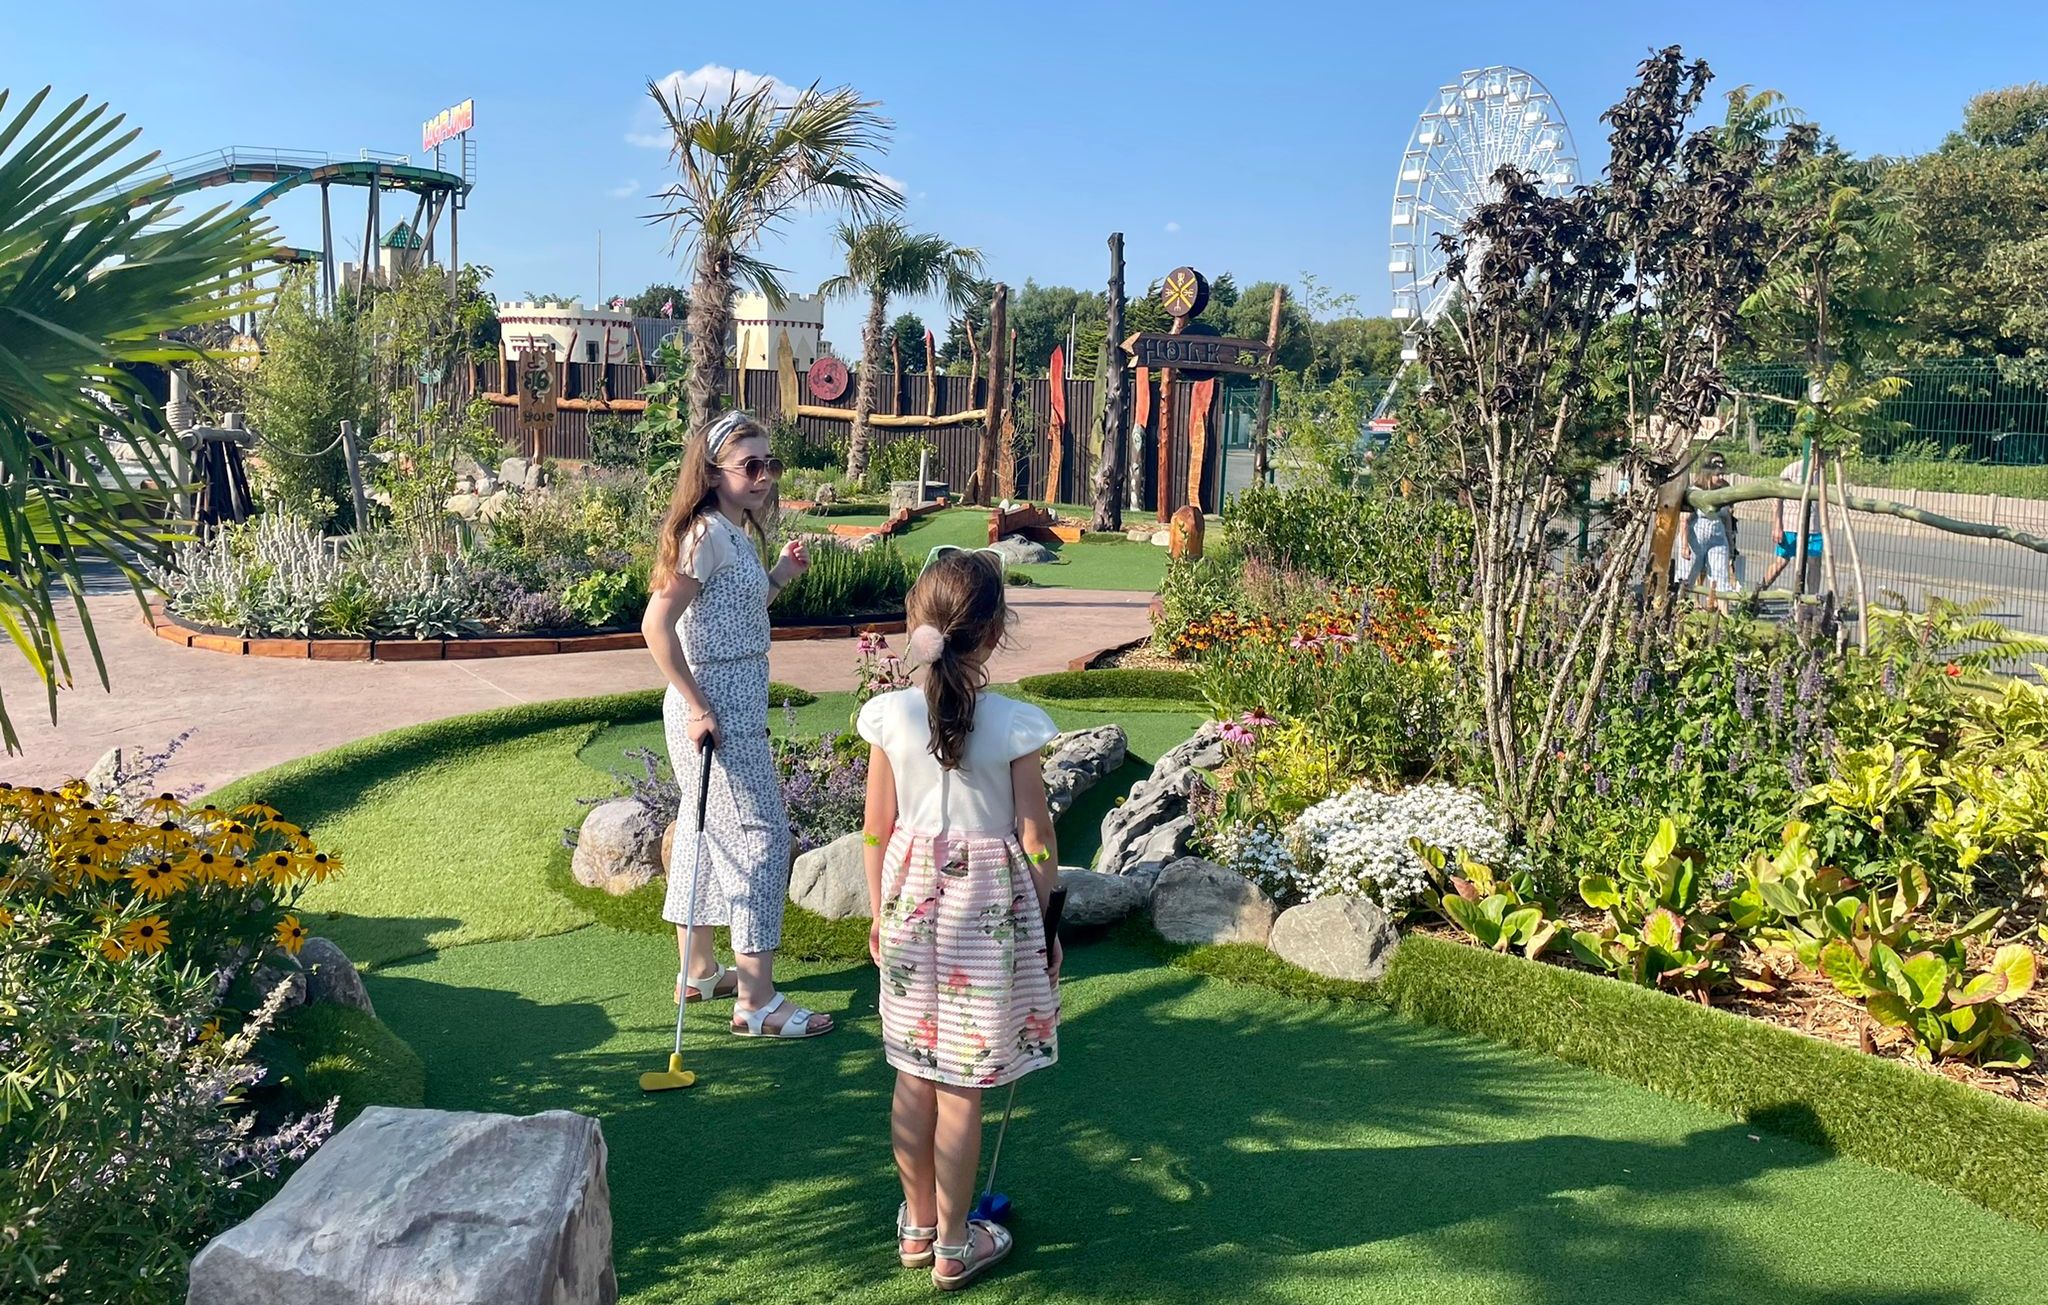 Francesca and Amelie Brown enjoy the new Viking Adventure Golf course at Southport Pleasureland. Photo by Claire Brown of Andrew Brown Media